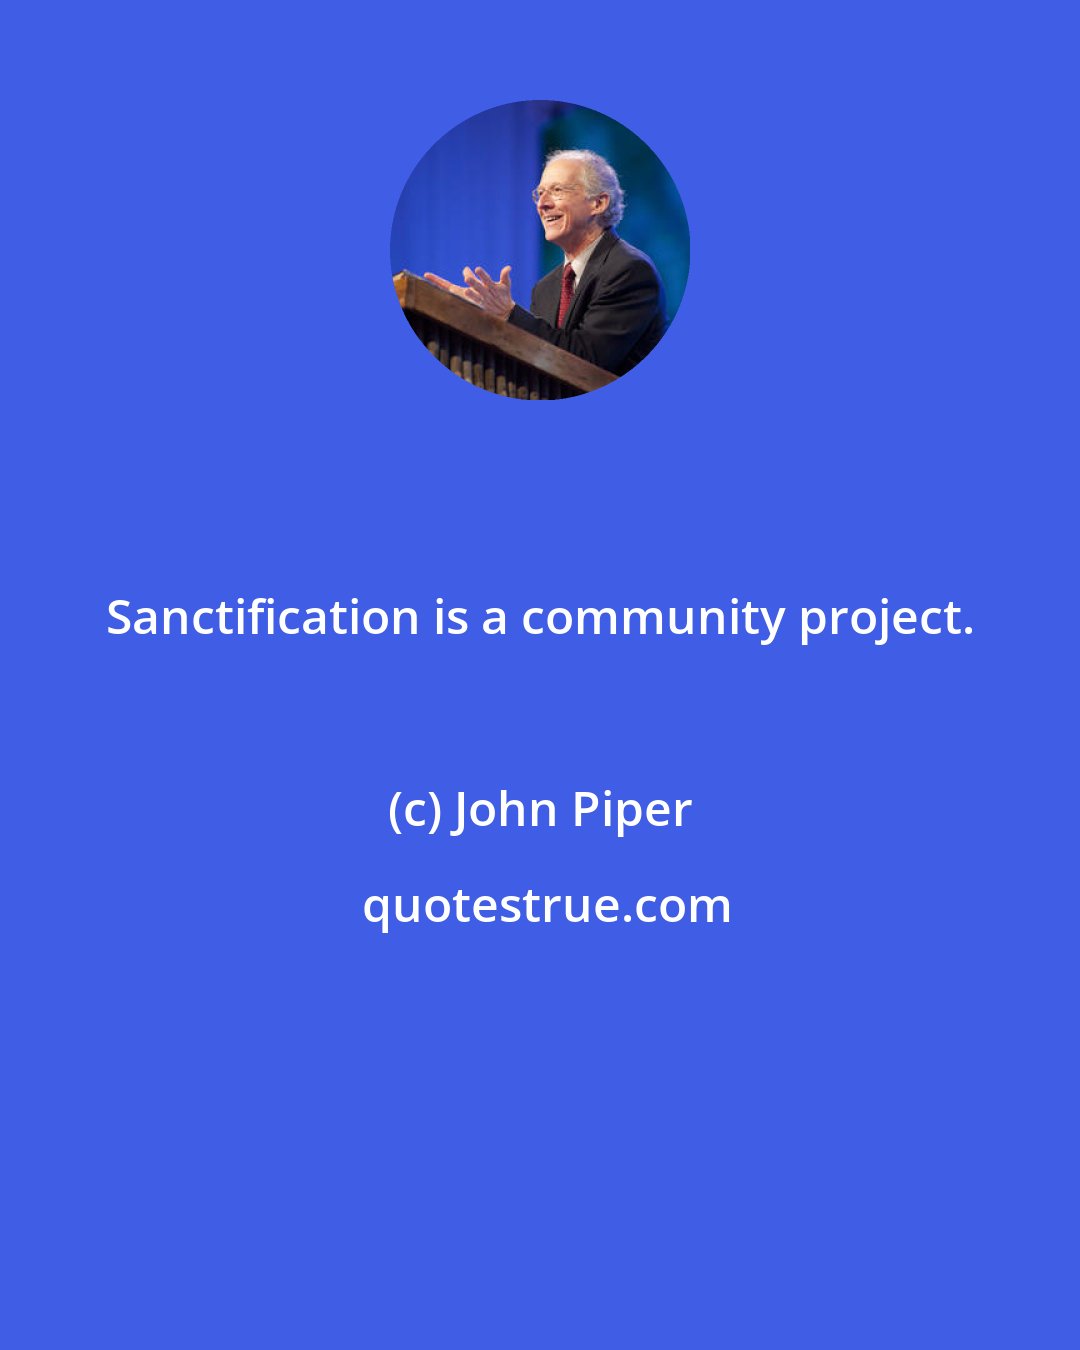 John Piper: Sanctification is a community project.